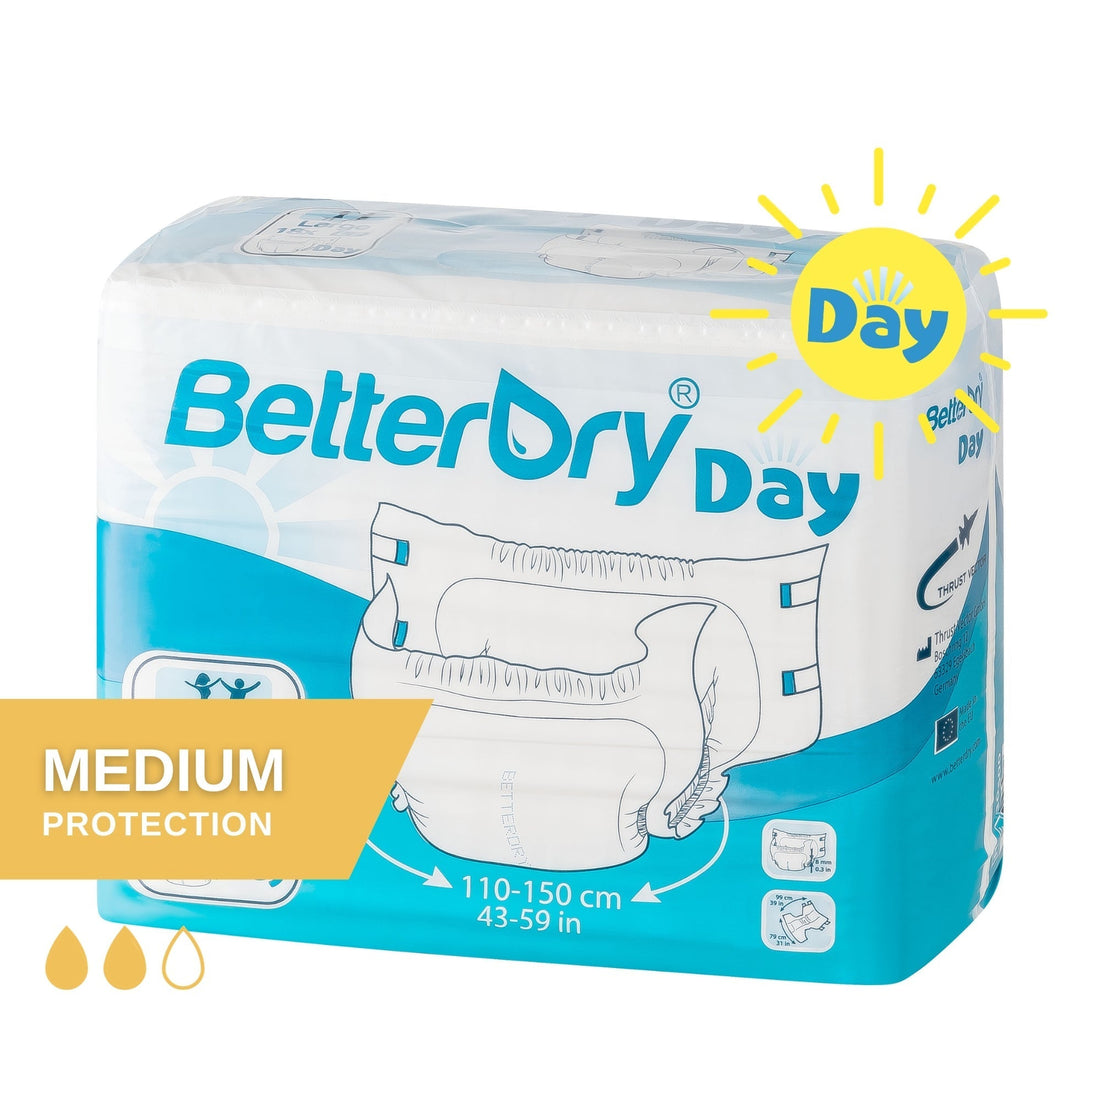 BetterDry 7 DAY Adult Diapers